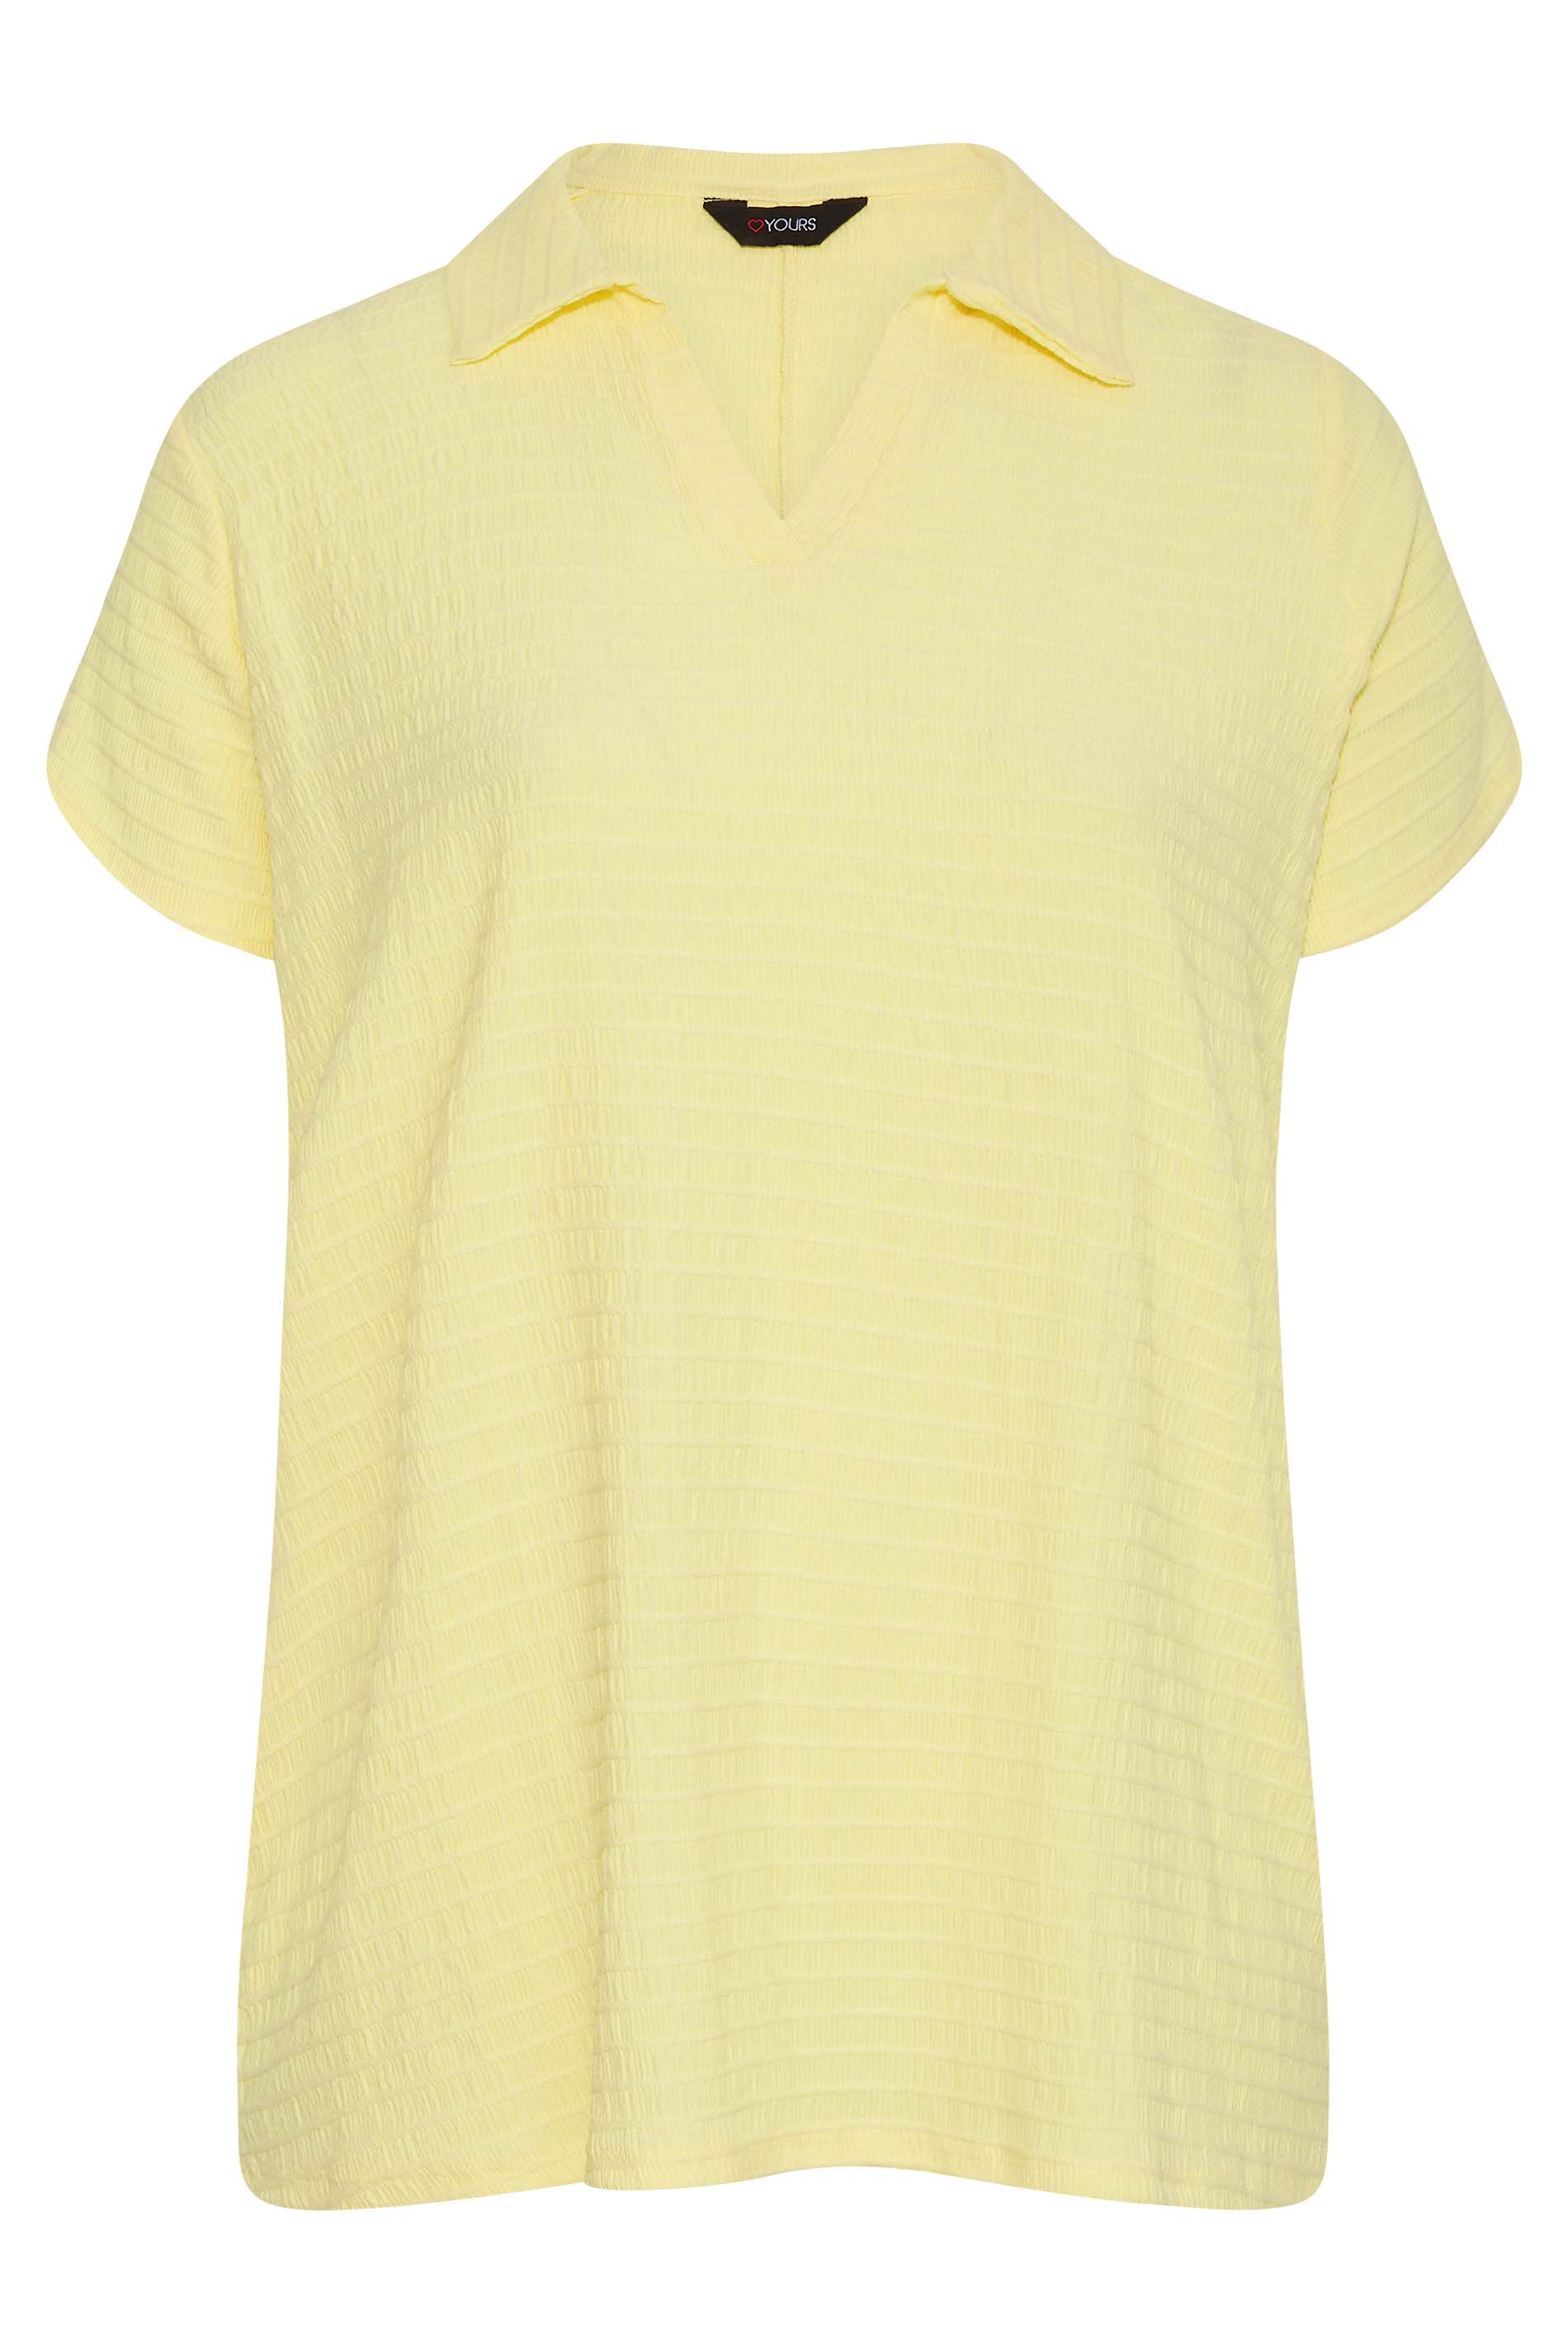 Curve Yellow Textured Polo Neck Top_X.jpg